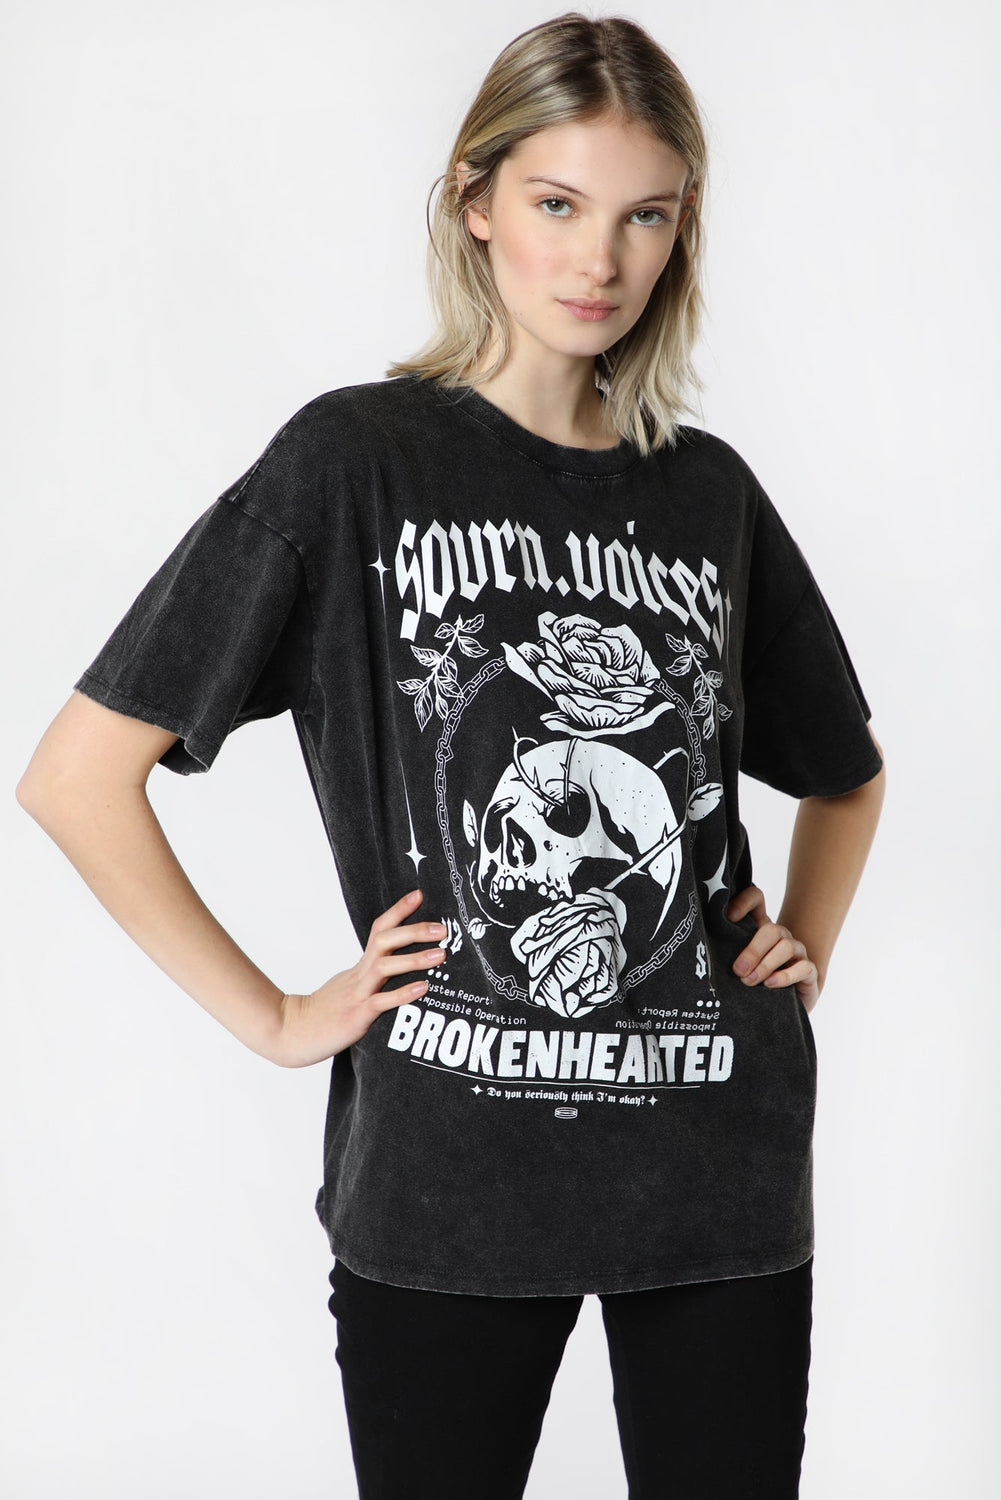 Womens Sovrn Voices Oversized Brokenhearted T-Shirt Womens Sovrn Voices Oversized Brokenhearted T-Shirt